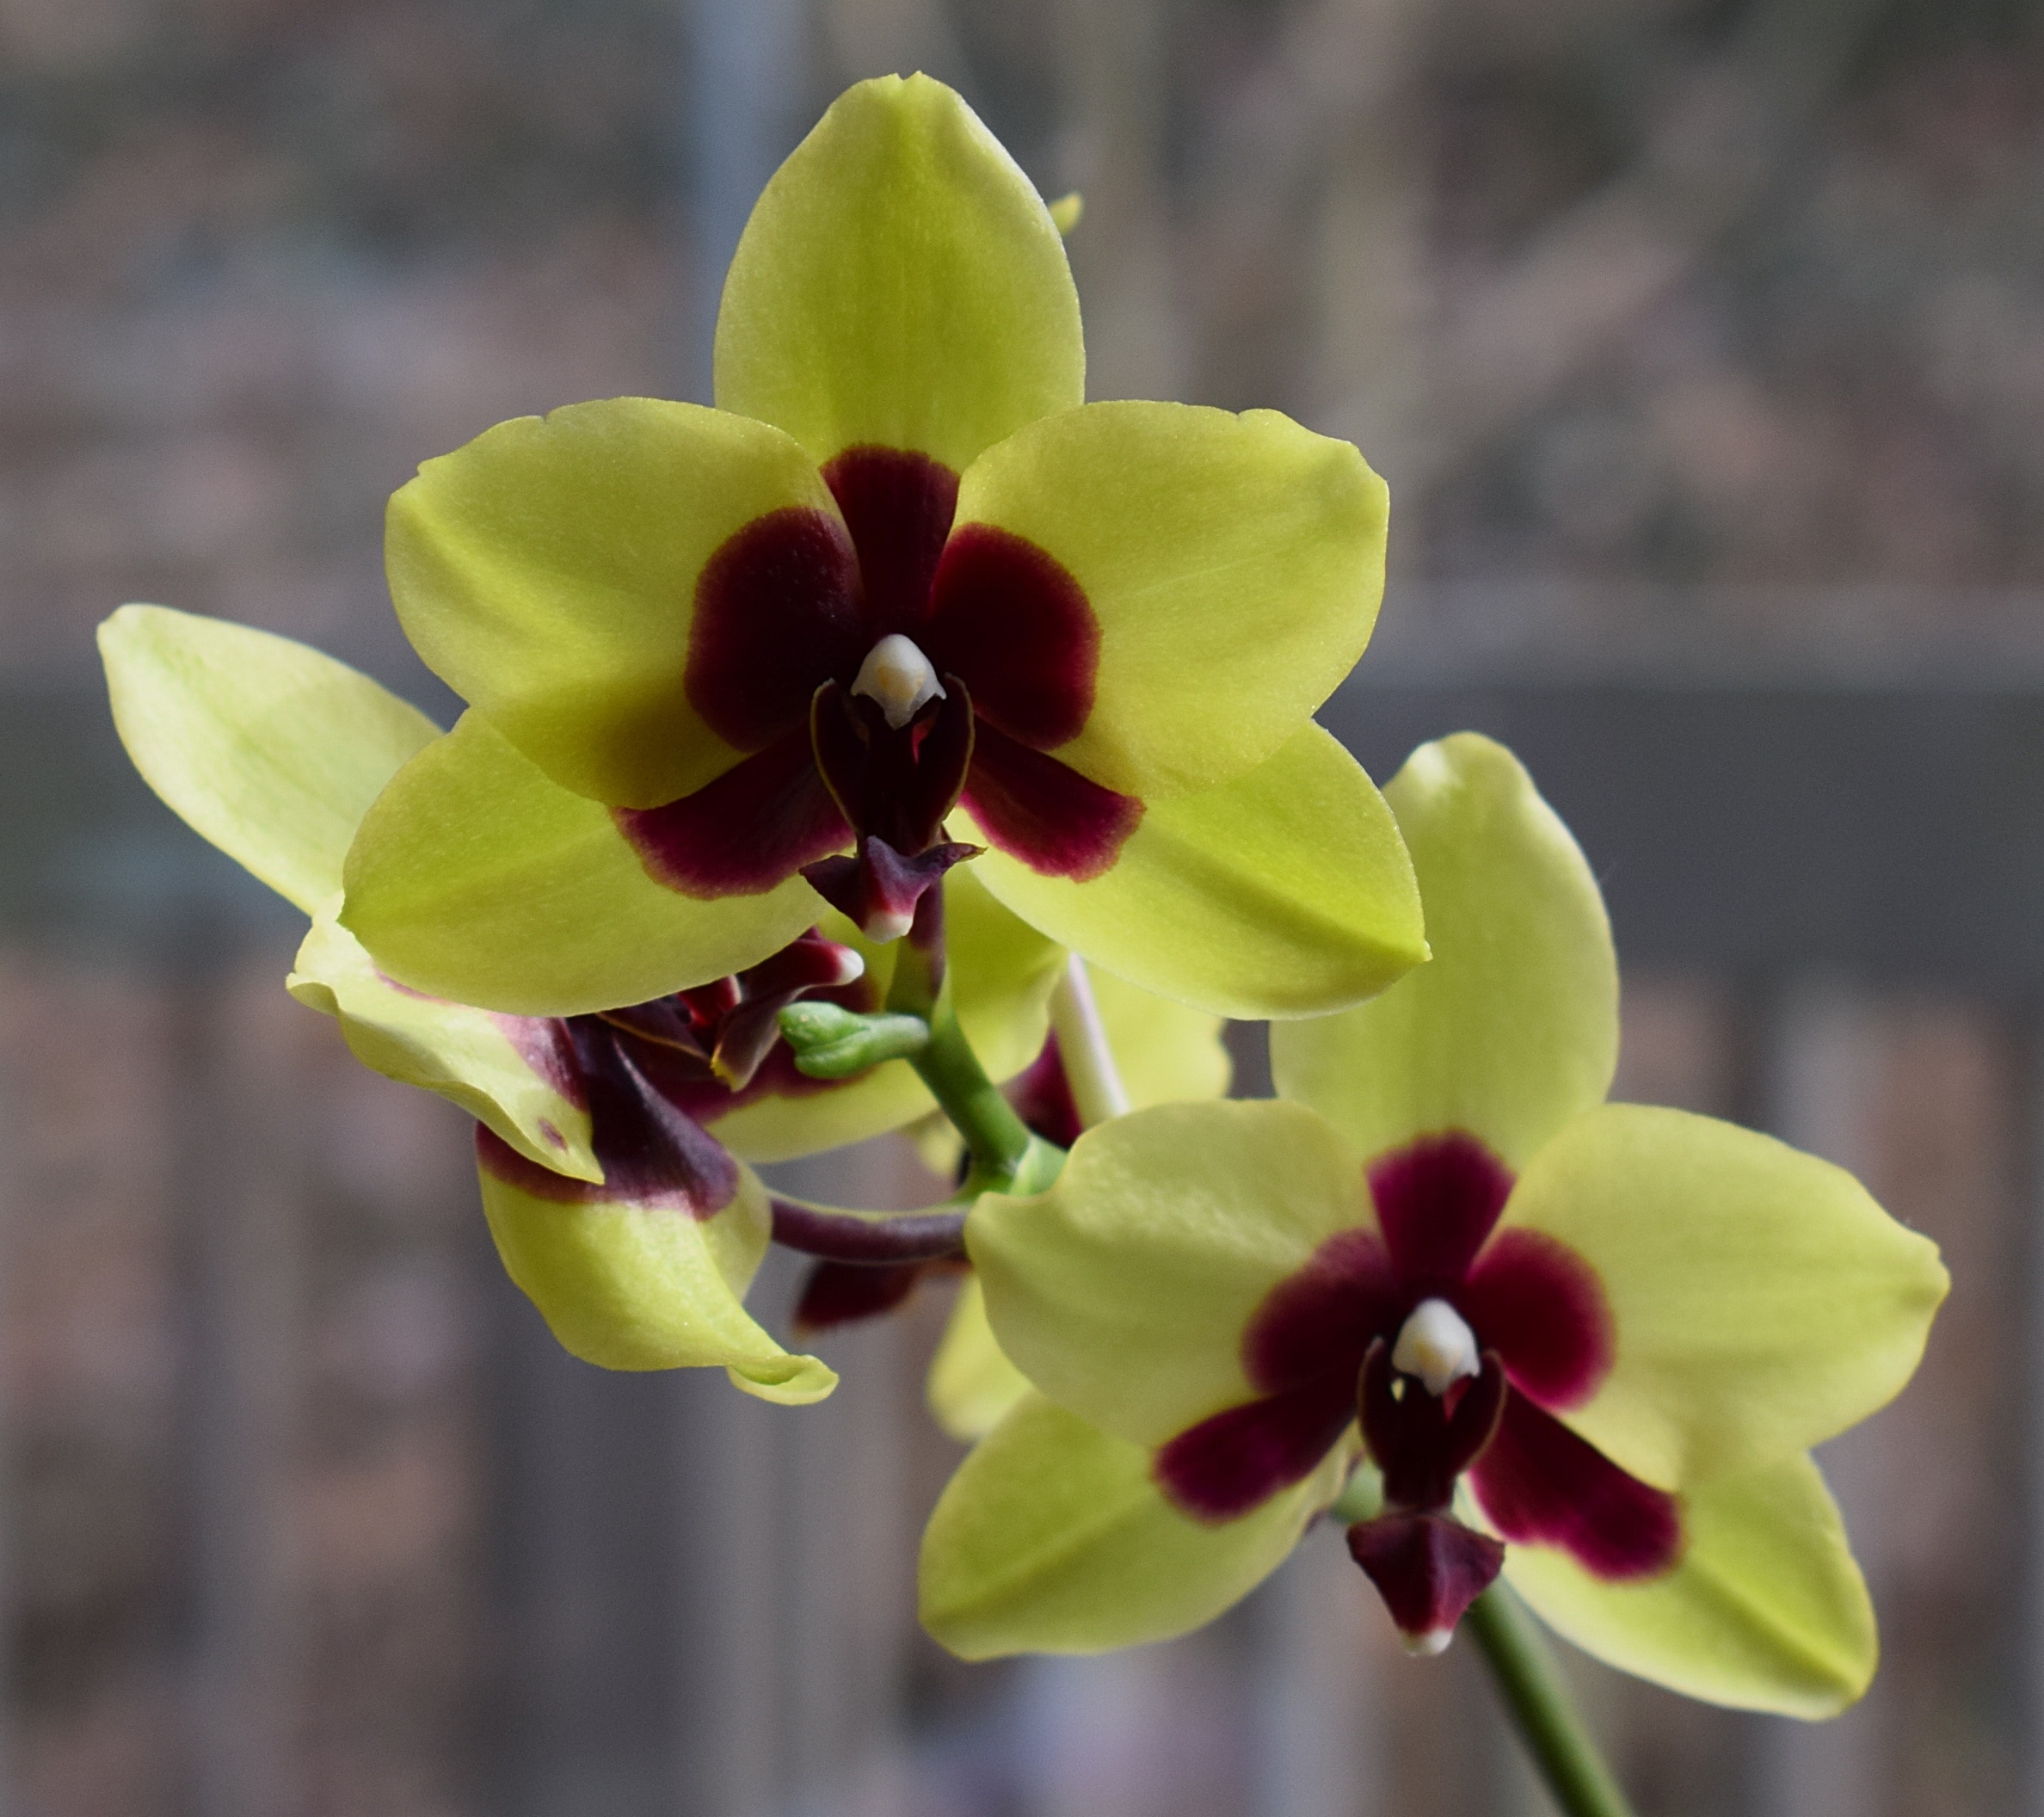 three yellow-and-brown orchids in shallow focus lens